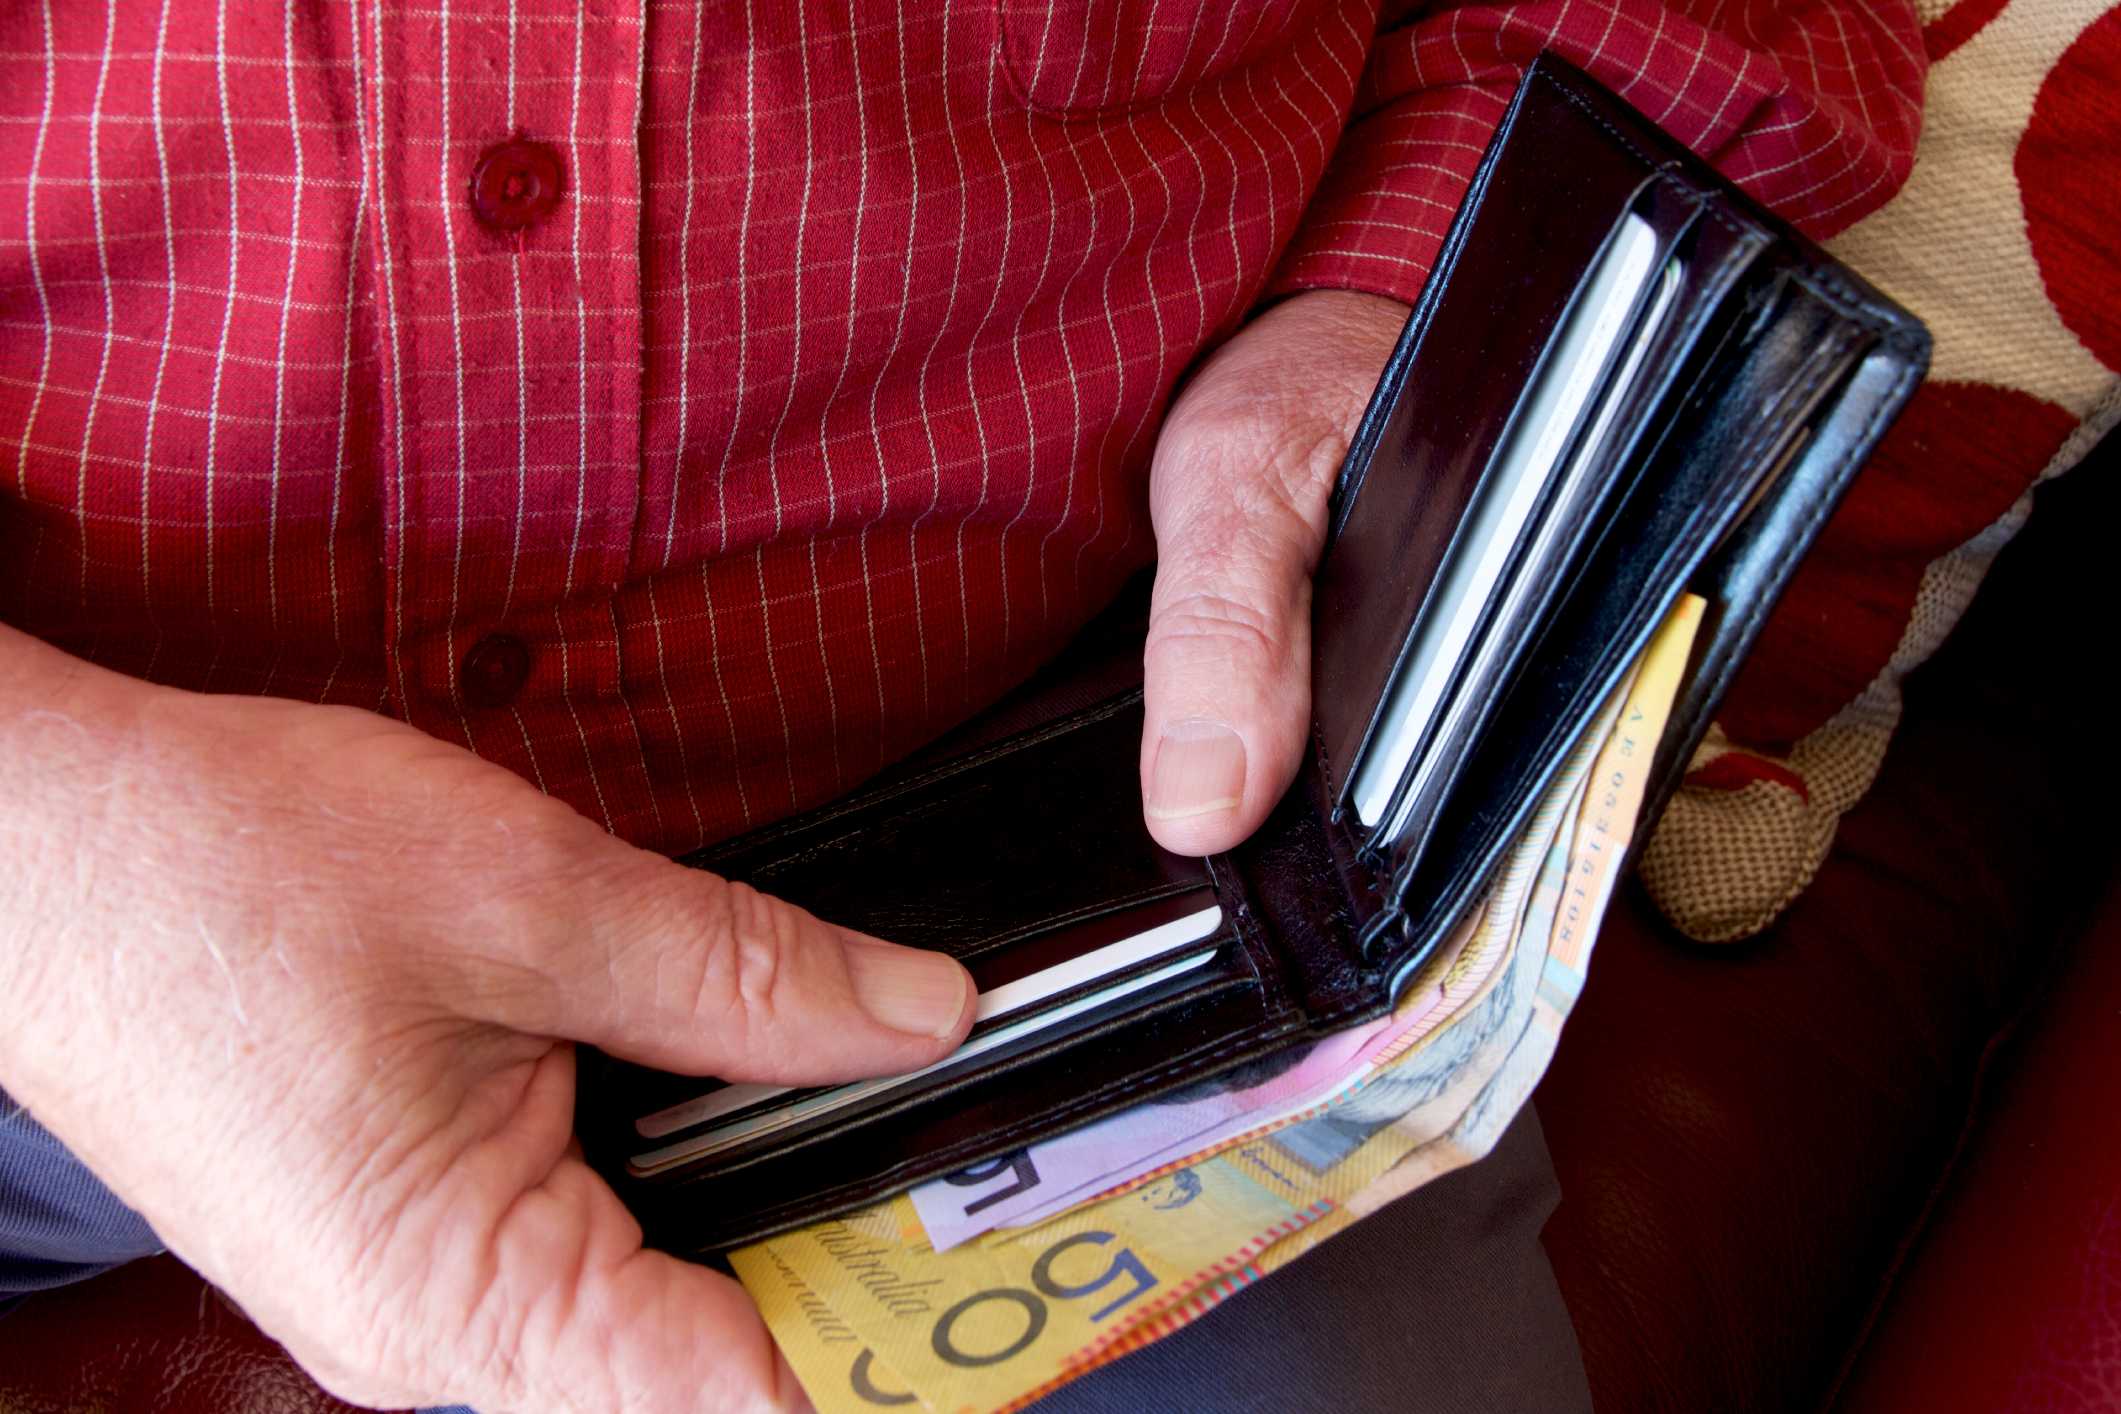 Cashless payments likely to disadvantage older Australians